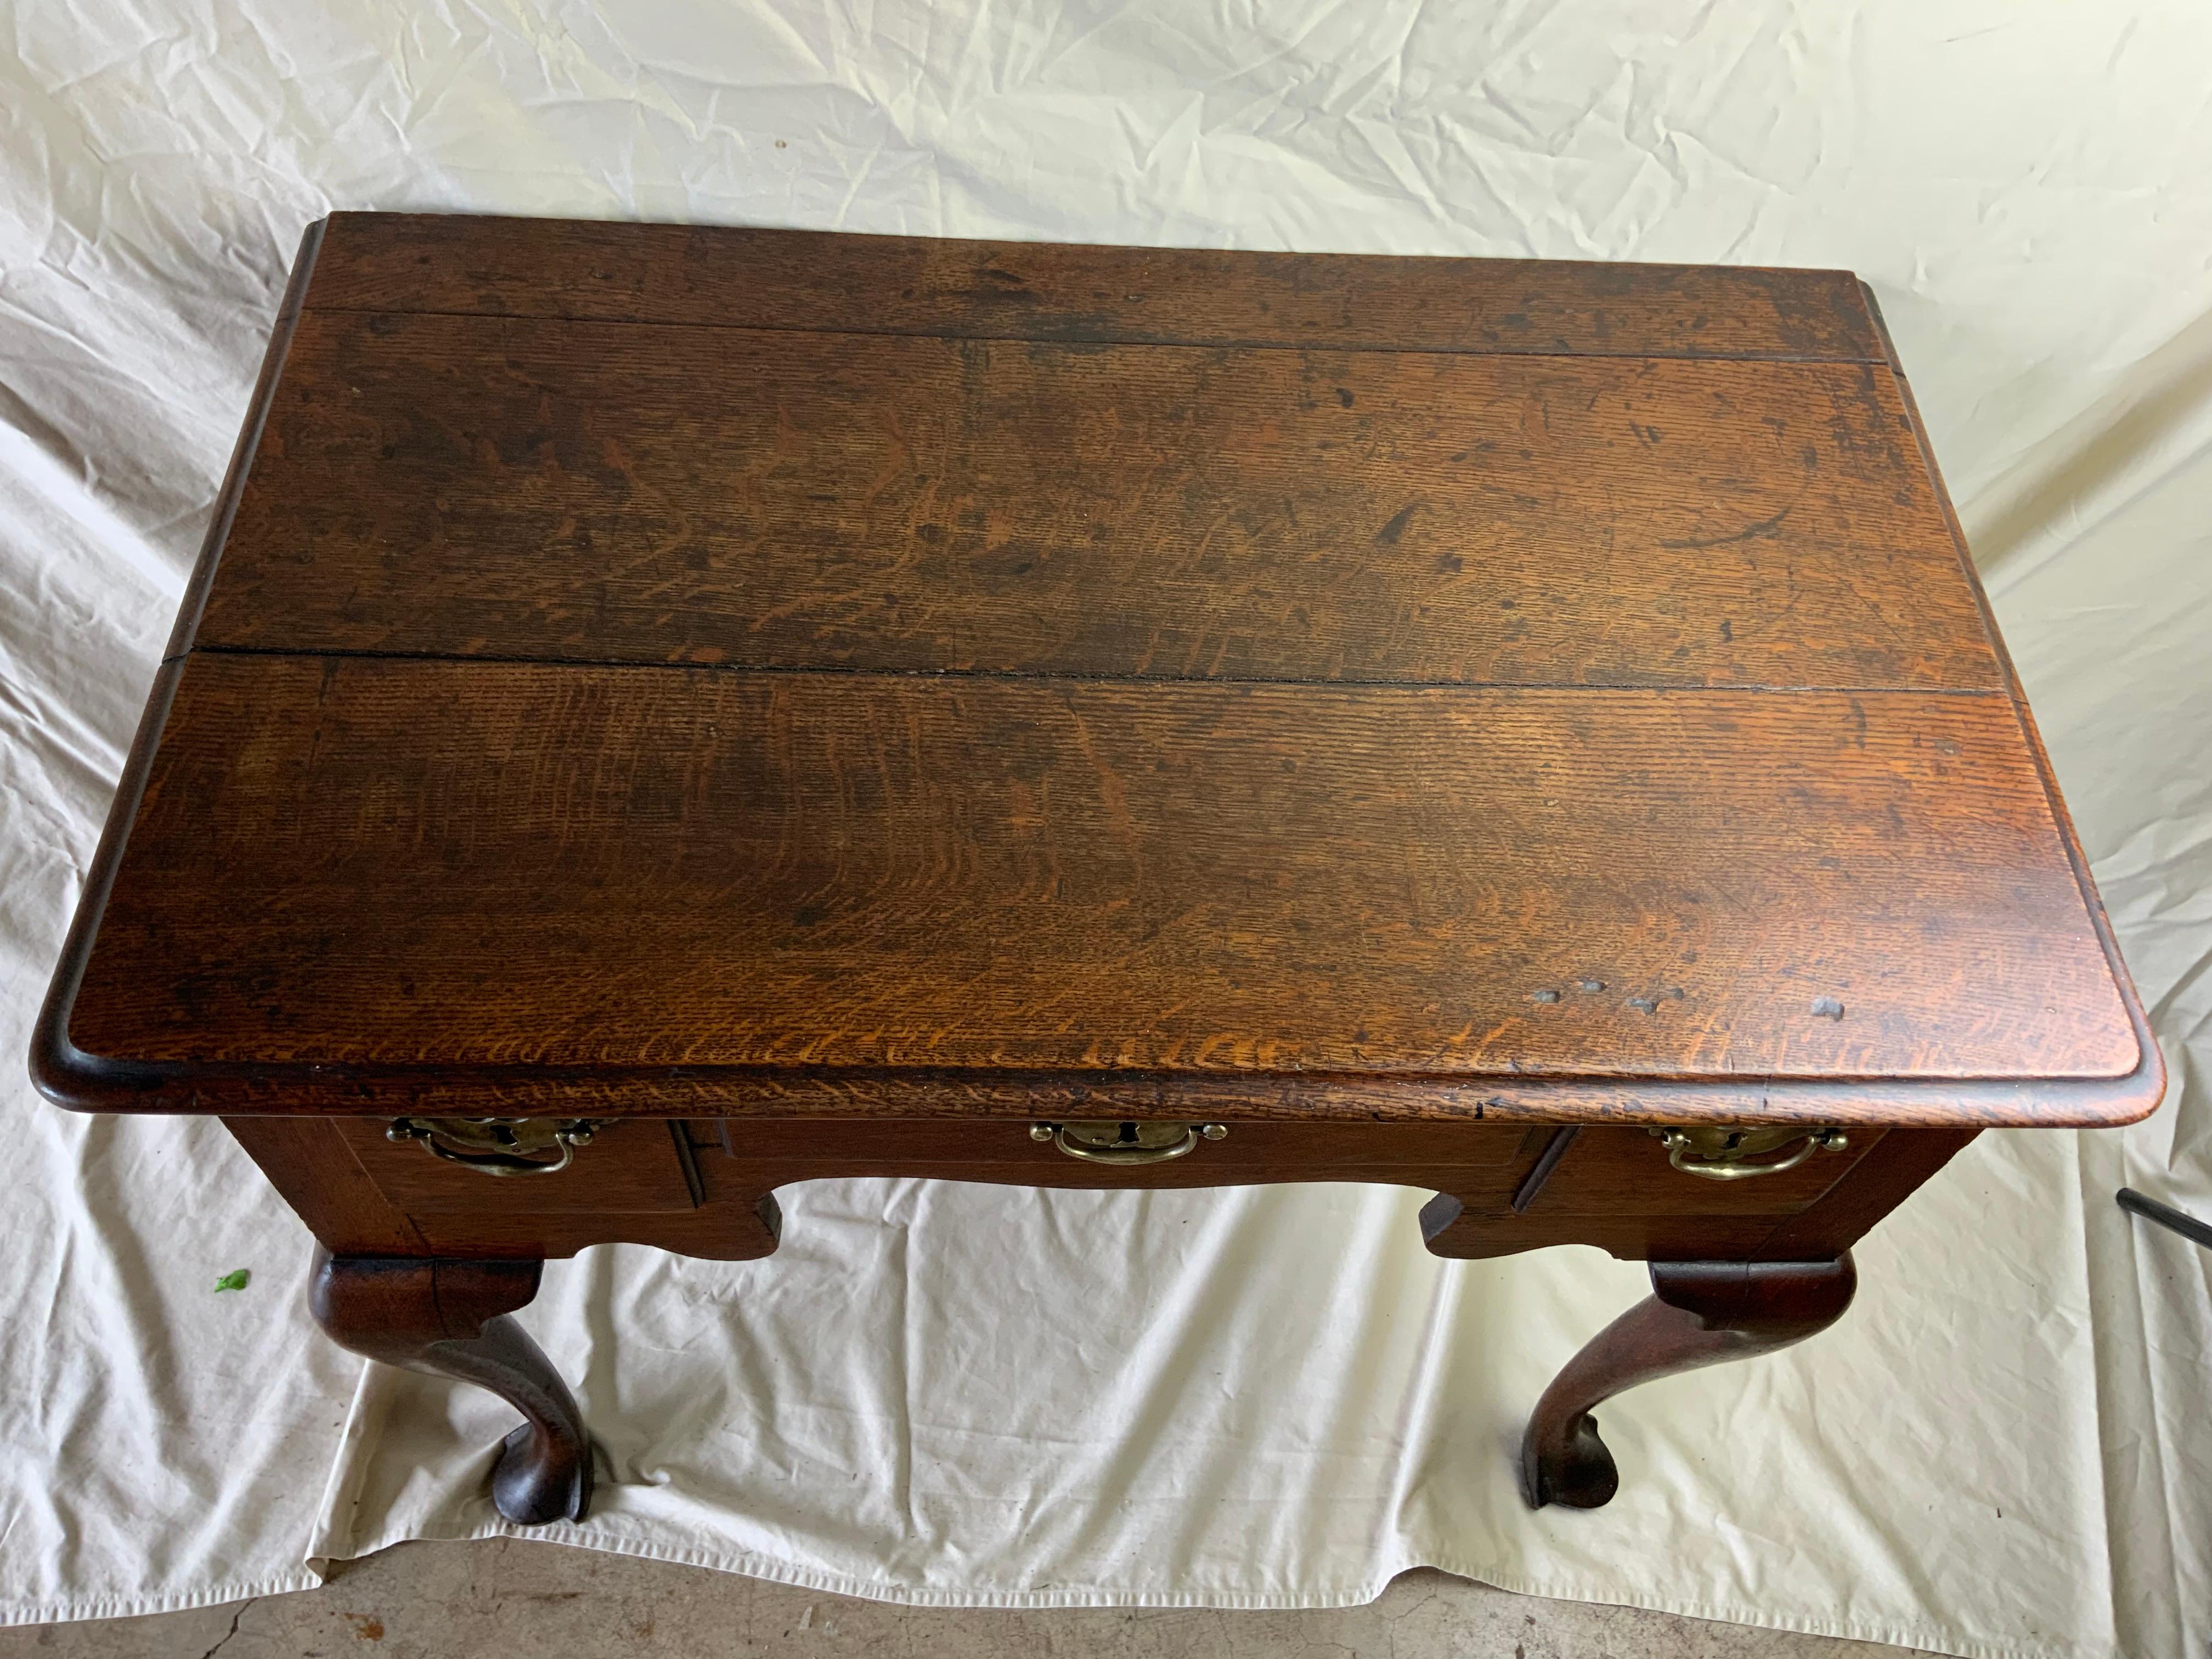 ate 18th Century Georgian Oak Lowboy 1780-90. This George III Period Oak Low Boy has a beautifully moulded top above three drawers with molded edges. Nicely shaped apron above four cabriole legs with trifid or drake feet. Original brasses and an old